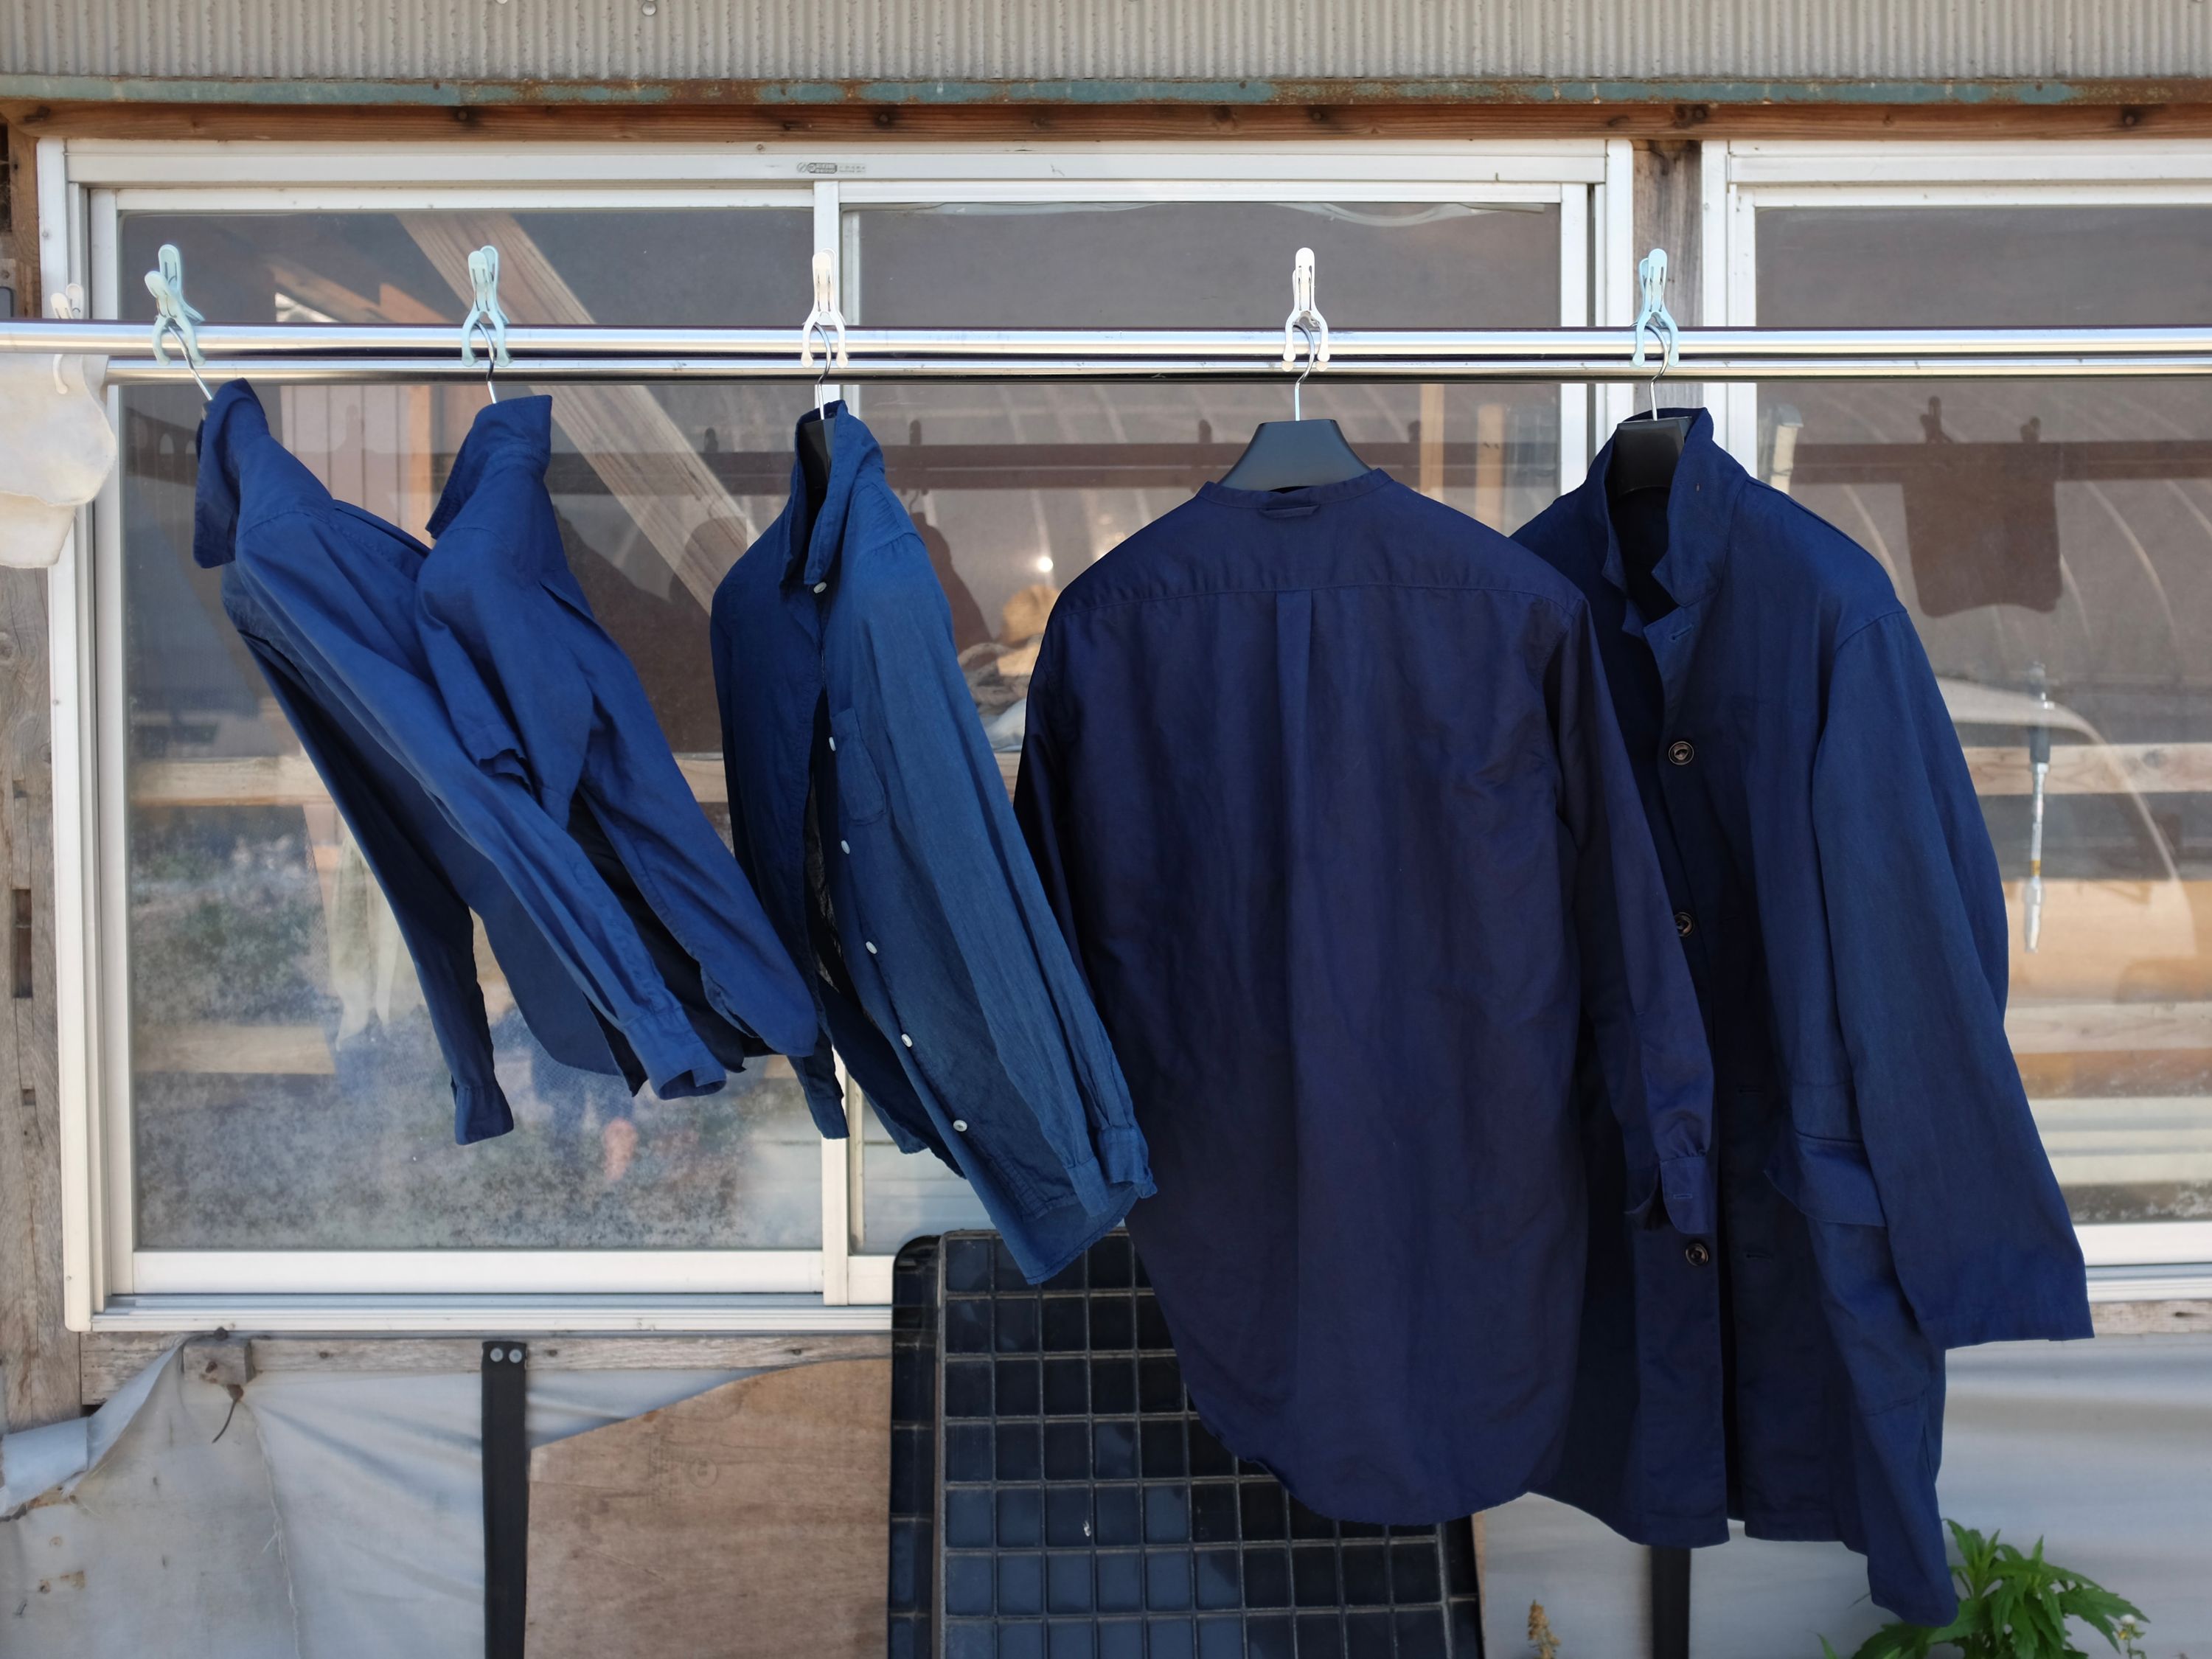 Three shirts and two jackets, all of them dyed indigo, drying in the breeze on a rail.